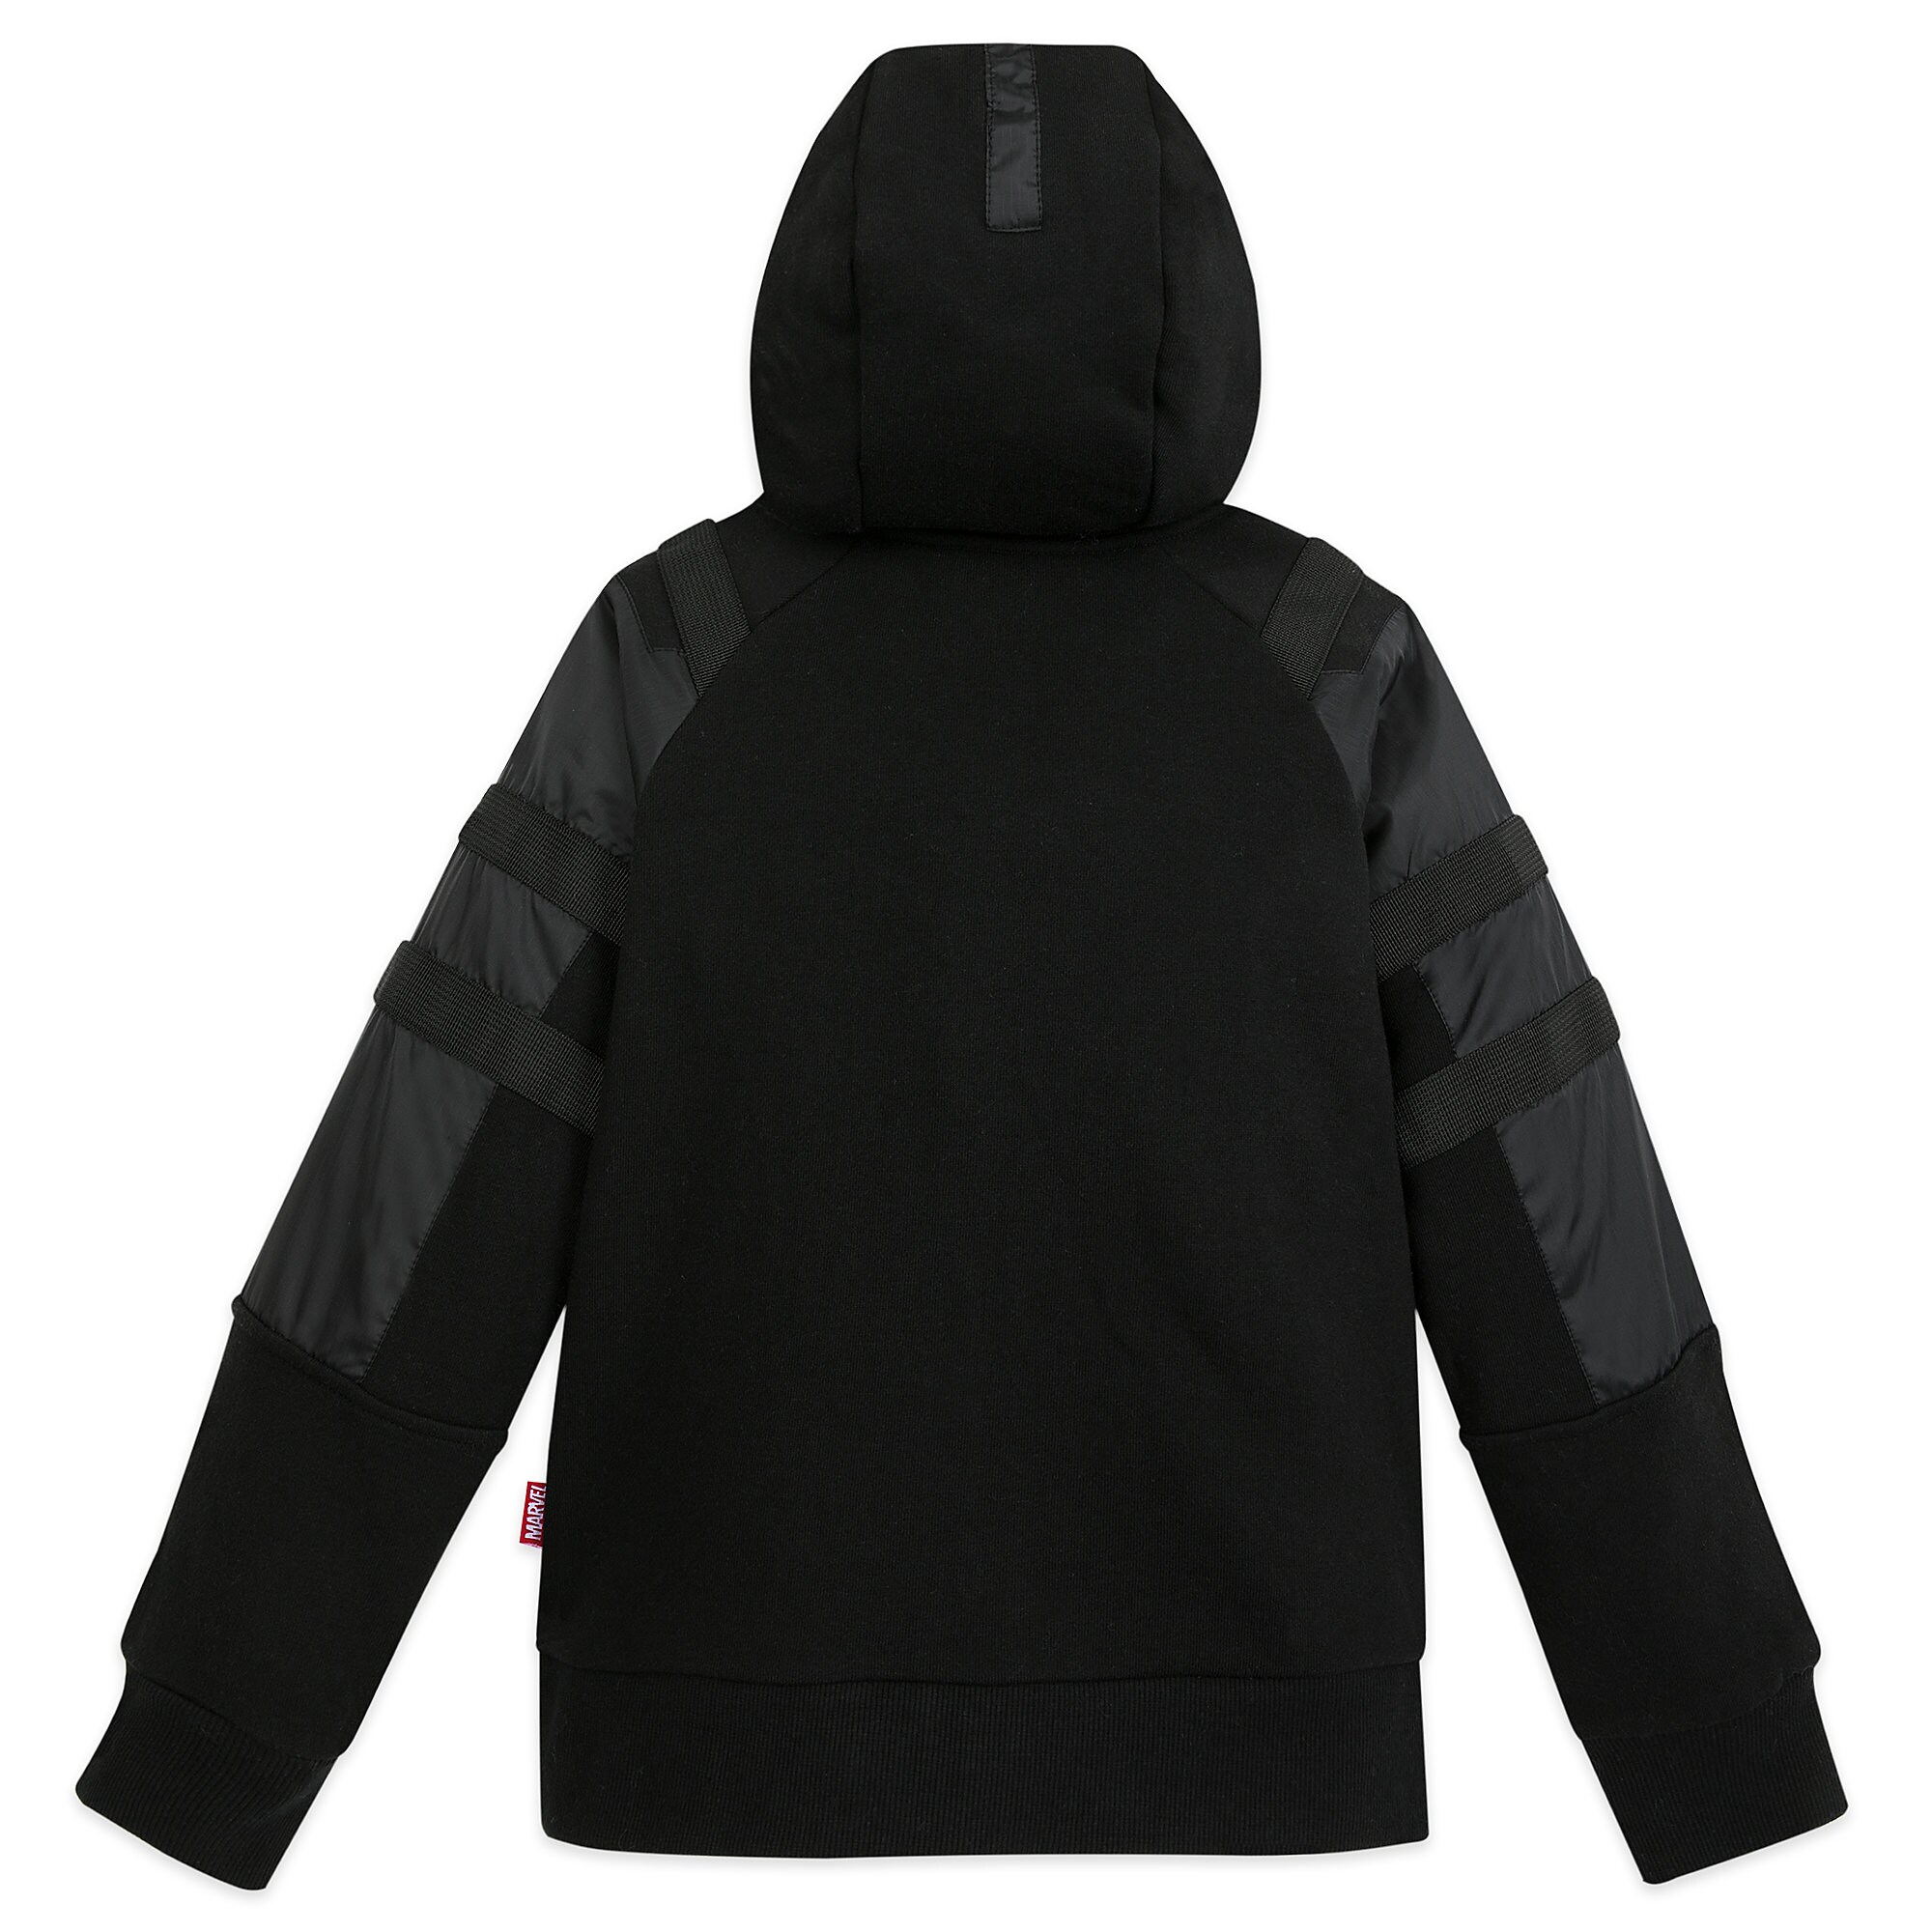 Spider-Man: Far from Home Stealth Suit Hooded Jacket for Kids